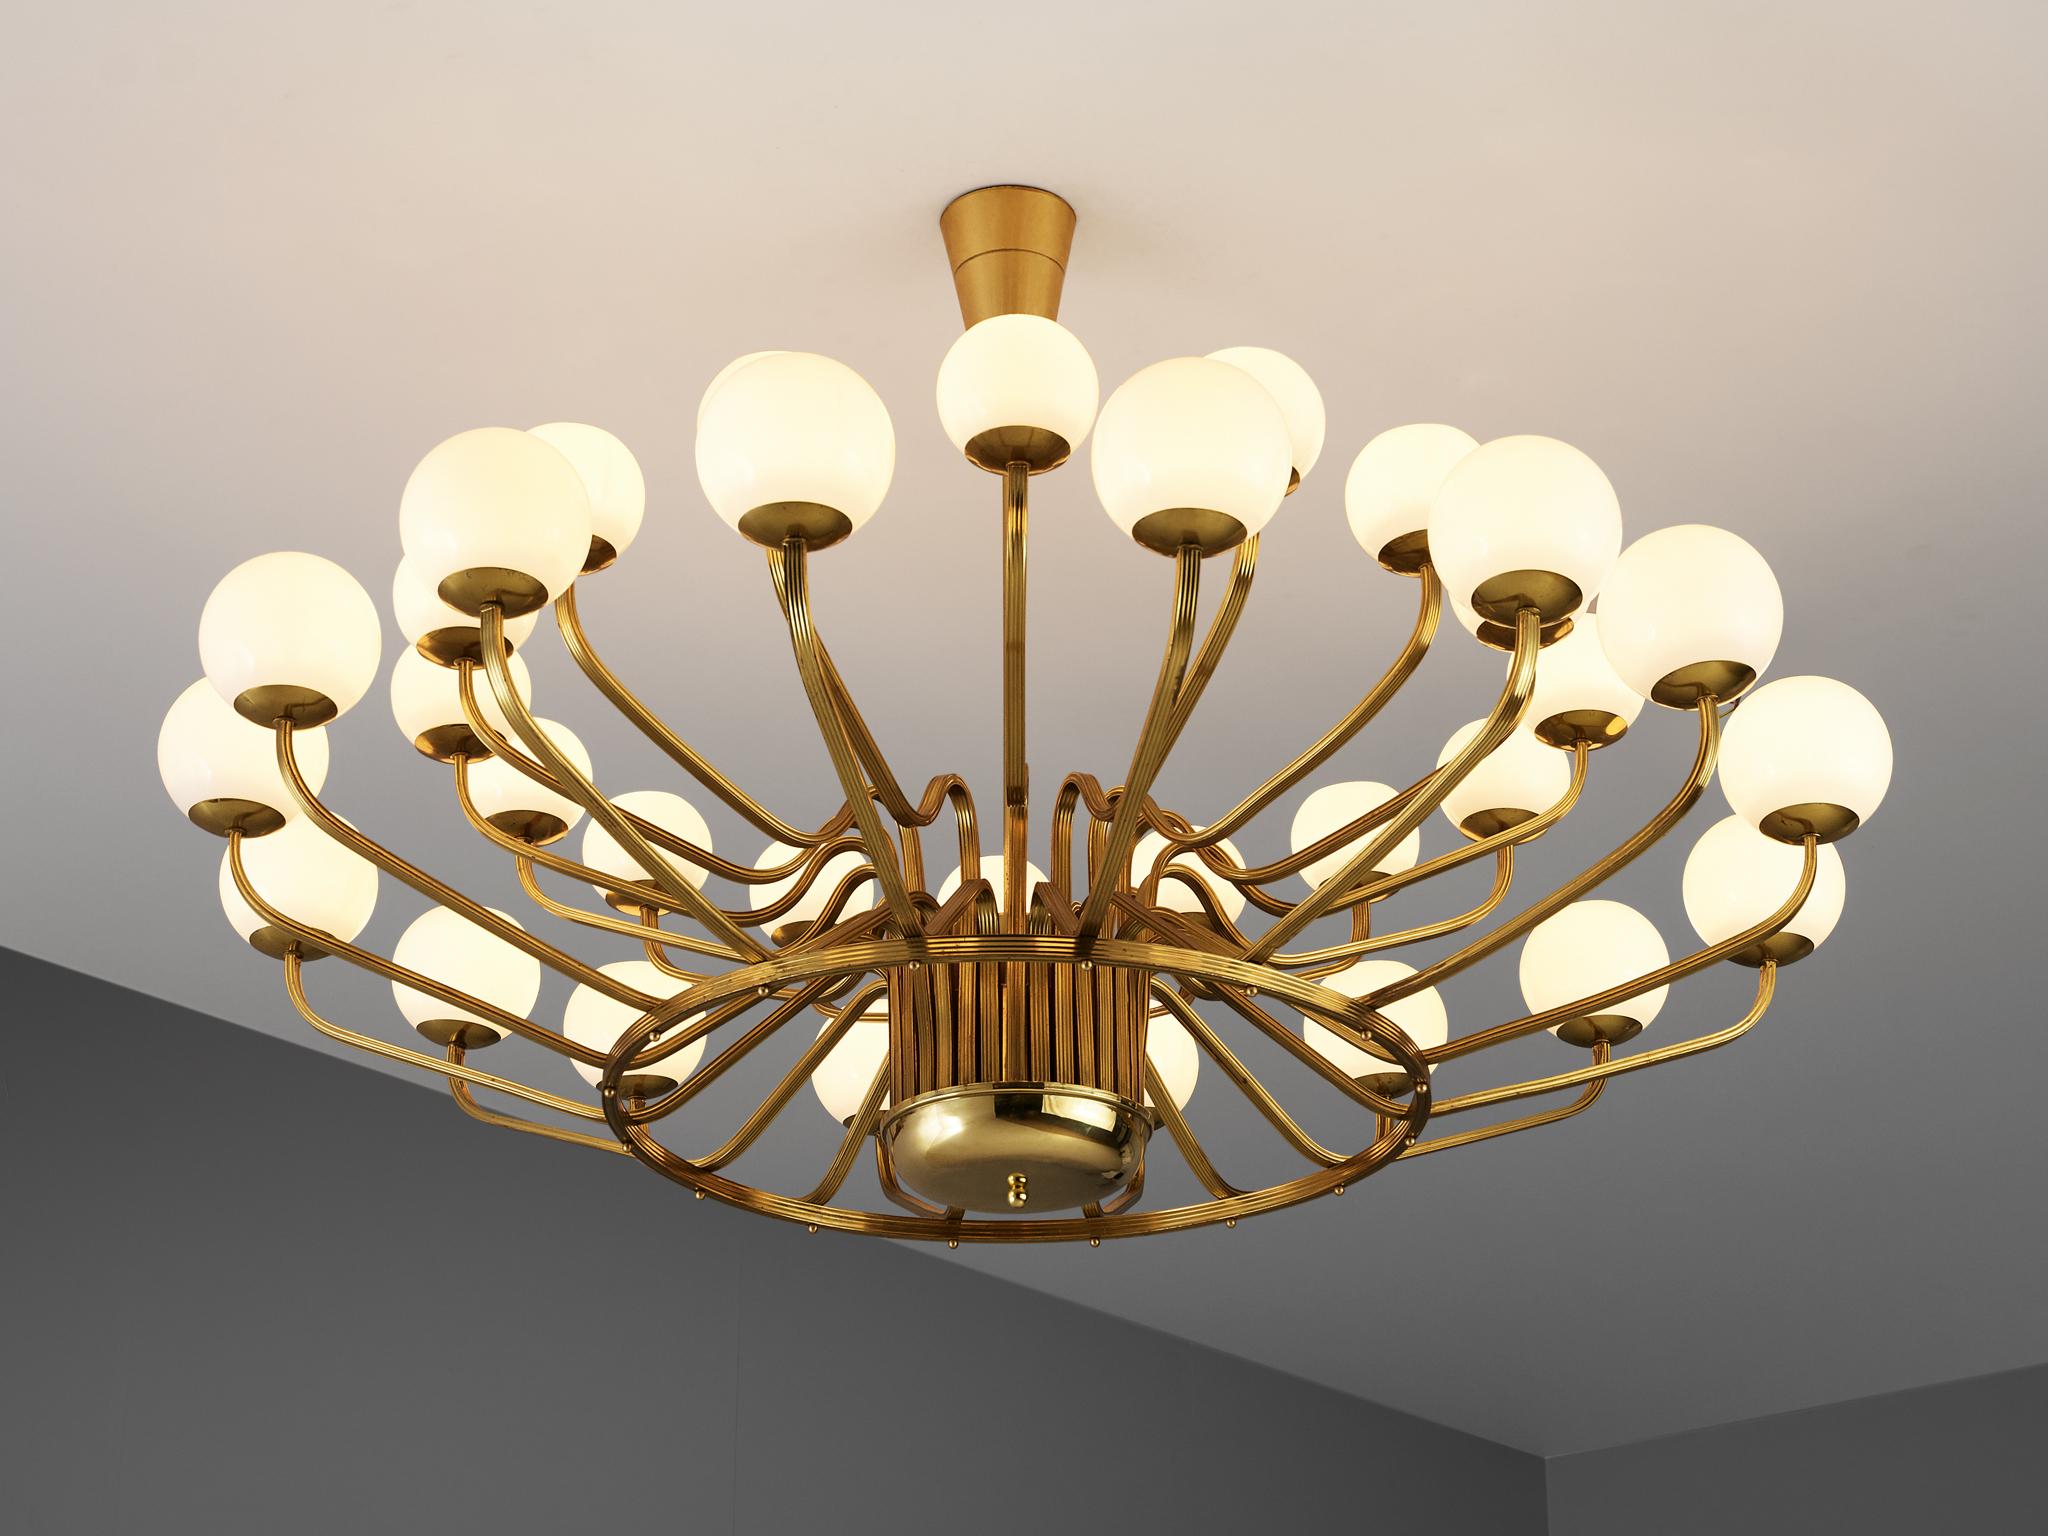 Chandelier, in brass and glass, European, 1970s.

Large chandelier with brass fixture and art-glass. The chandelier with brass frame consist of two rows sixteen lights, formed in a circle, with glass shades. The pleasant light it spreads is very